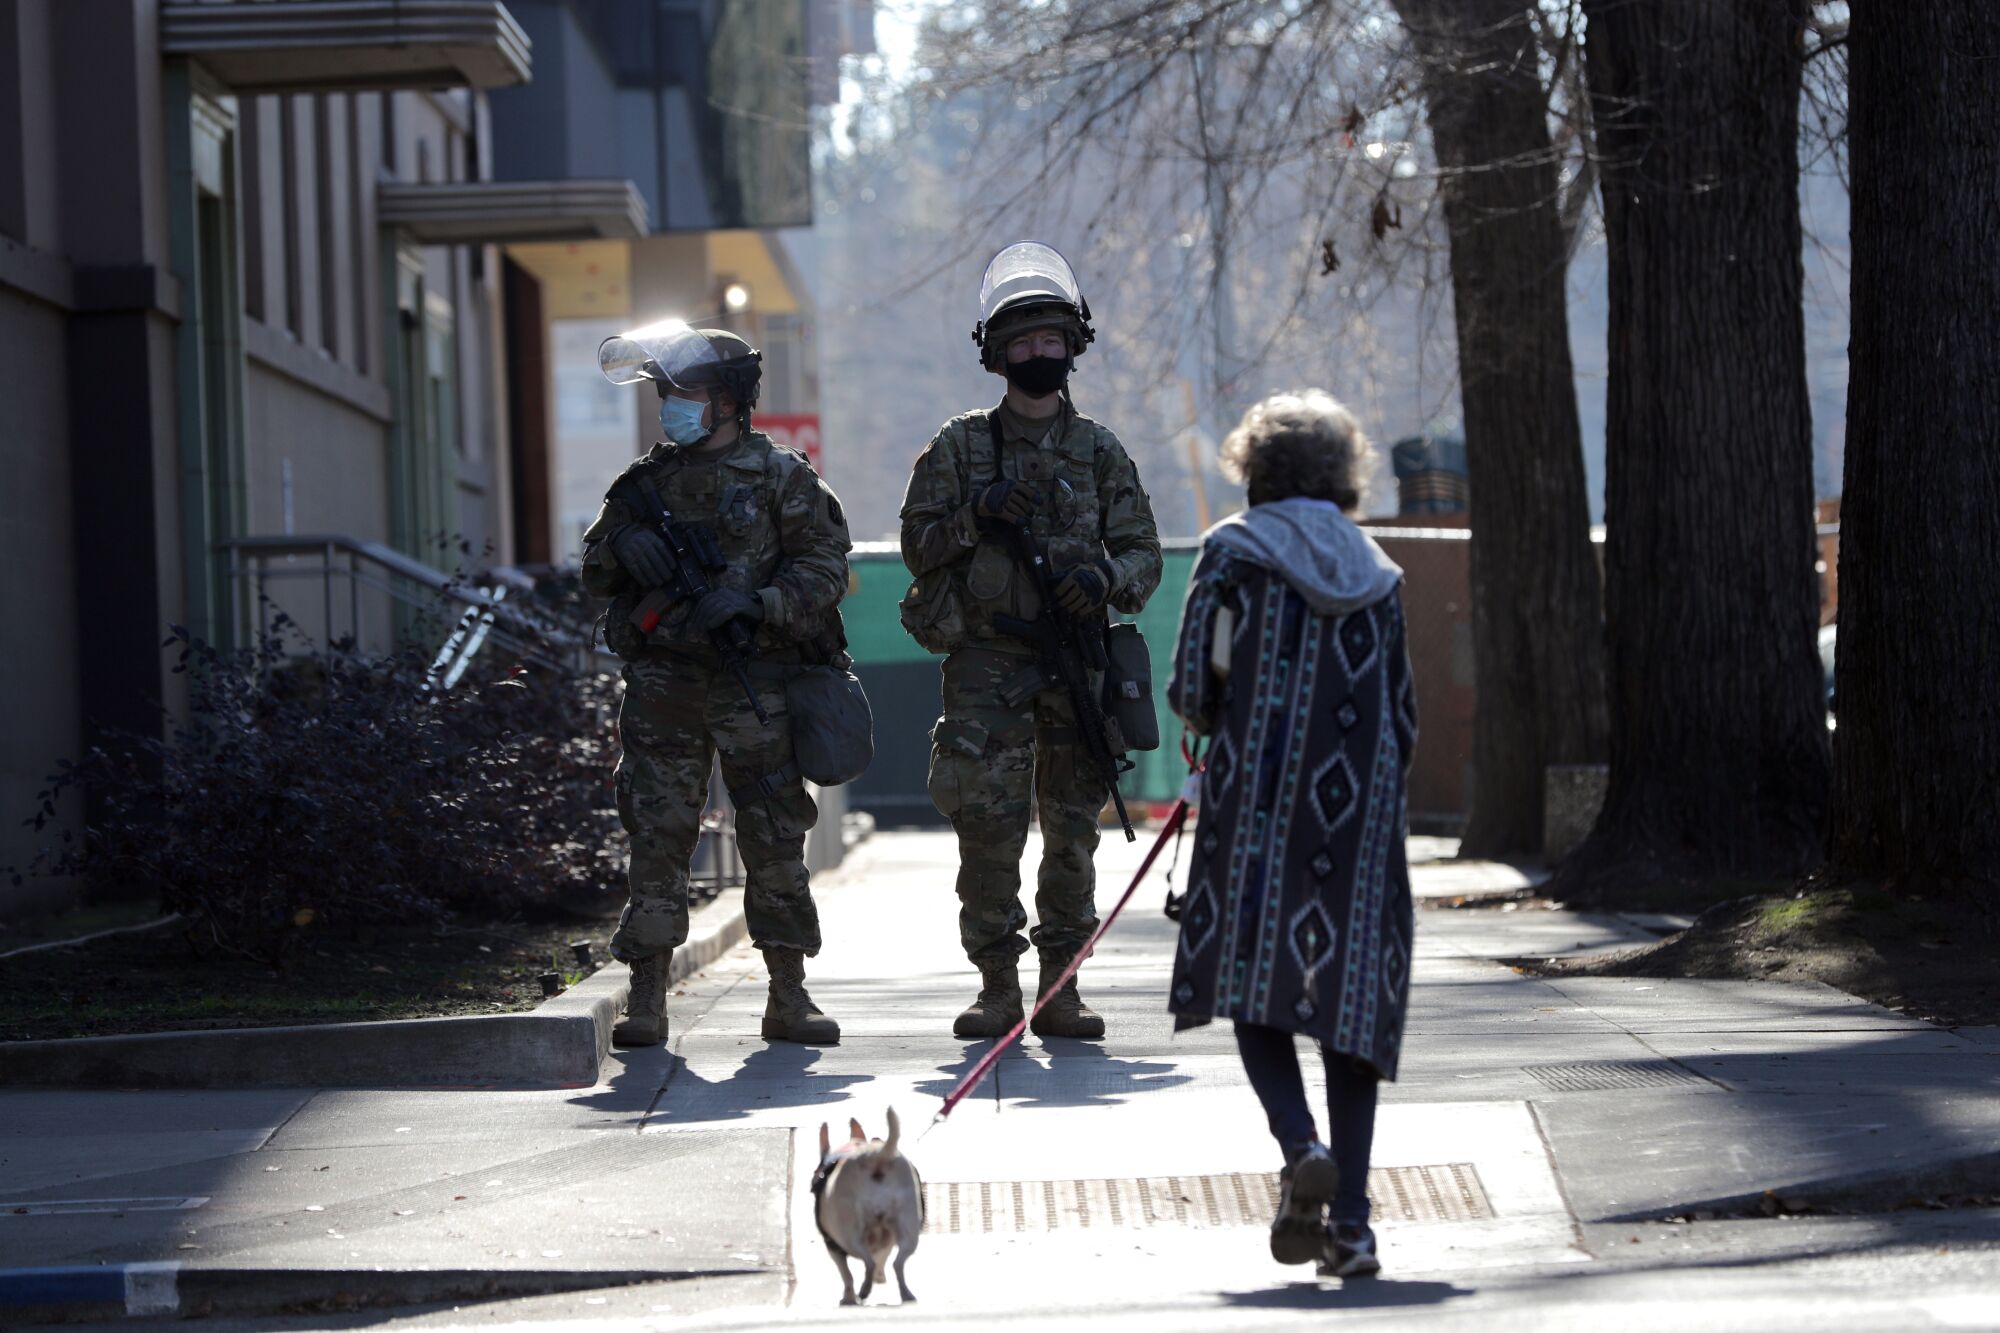 A woman walks her dog past armed National Guardsmen near the California Capitol.